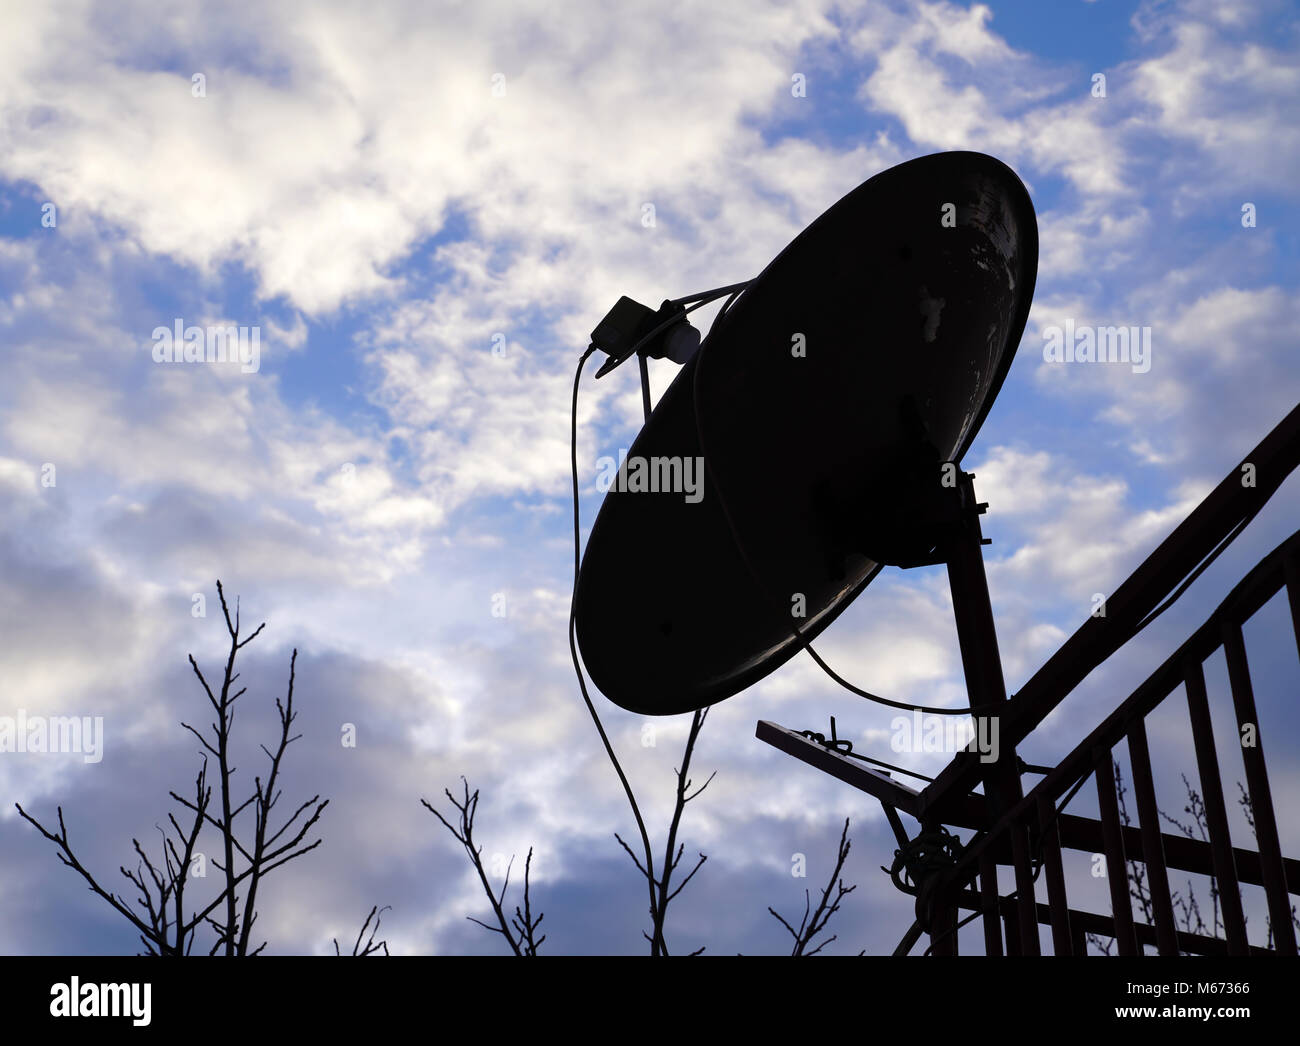 Silhouette of home satellite dish antenna on the balcony with cloudy blue sky Stock Photo